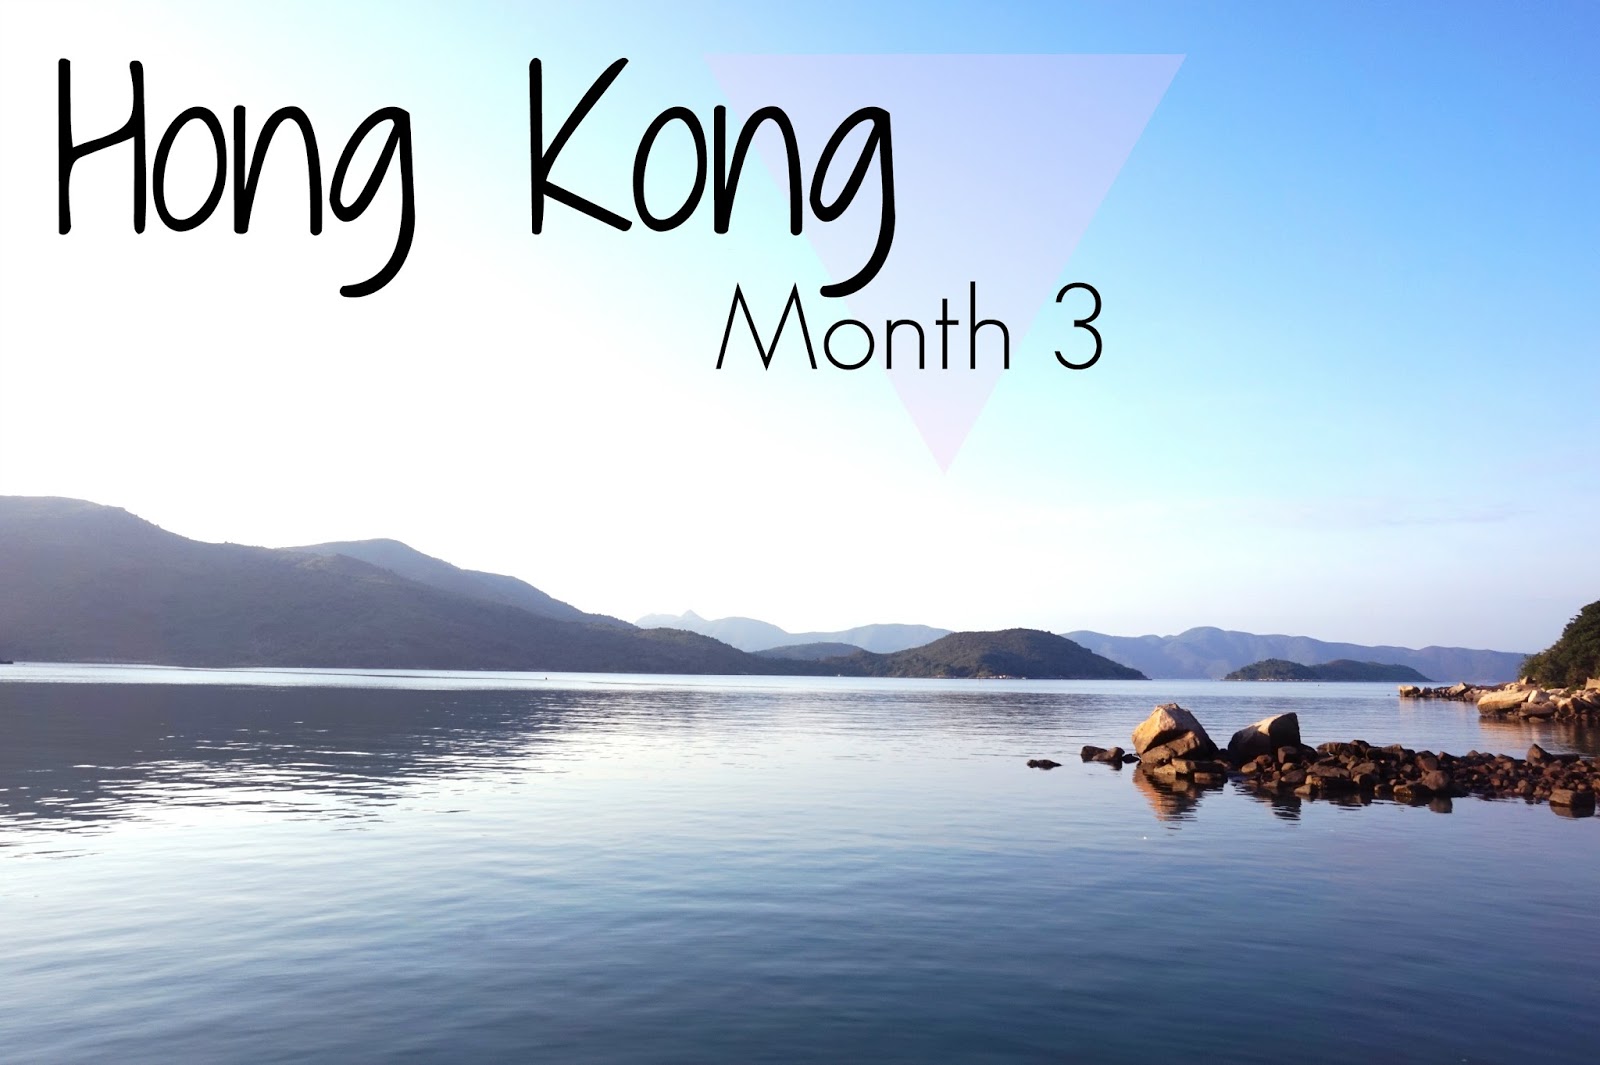 Monthly roundup // Hong Kong month 3